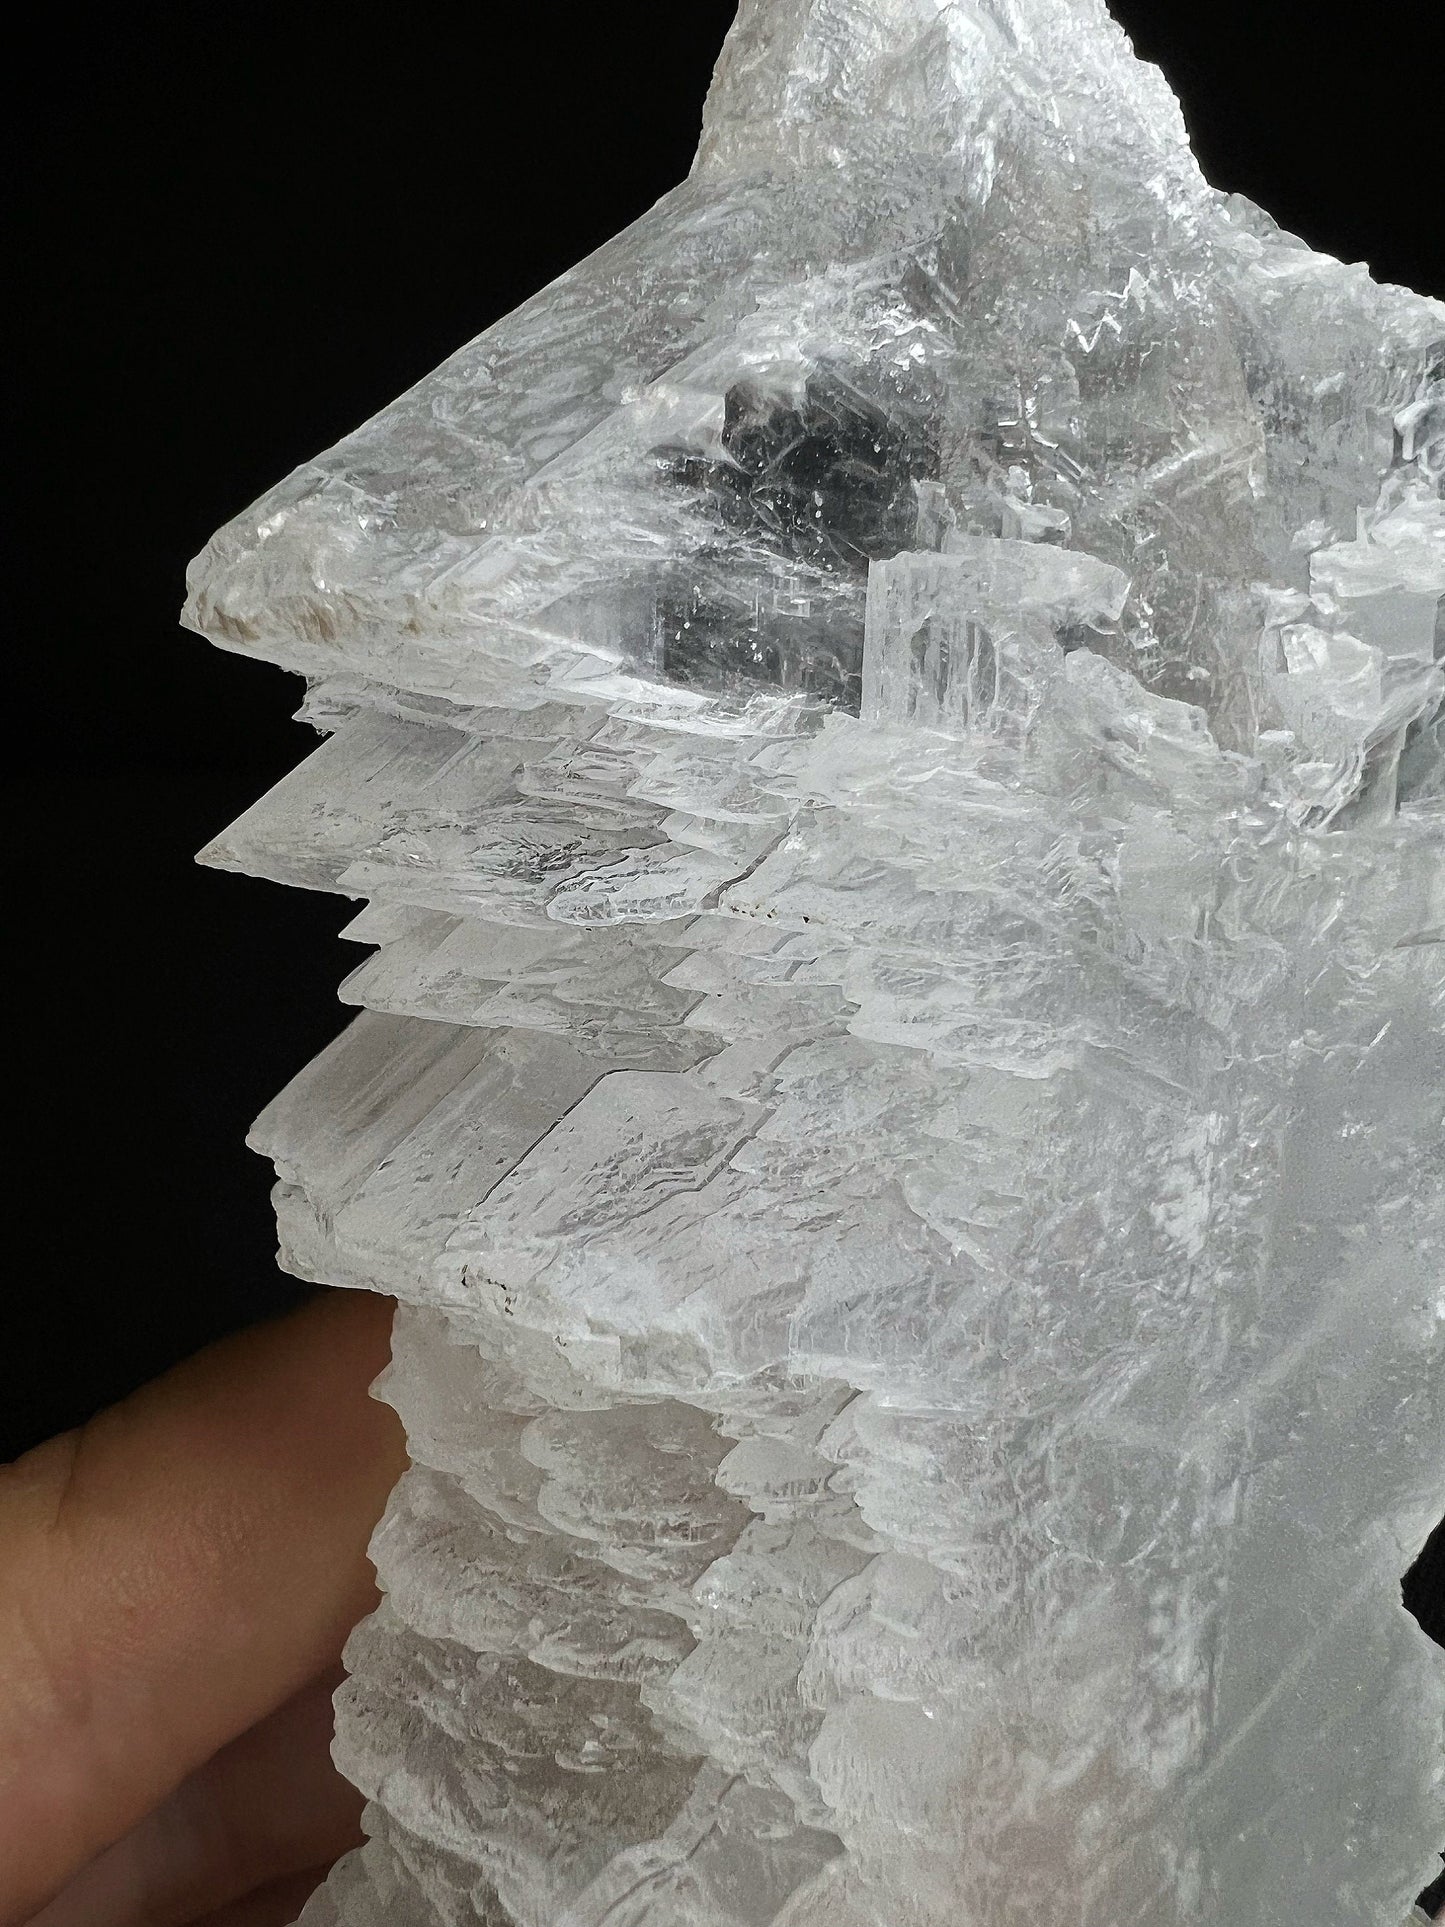 Fishtail Selenite From Naica Mine, Chihuahua, Mexico- Collectors Piece, Home Décor, Gift, Crystal Healing